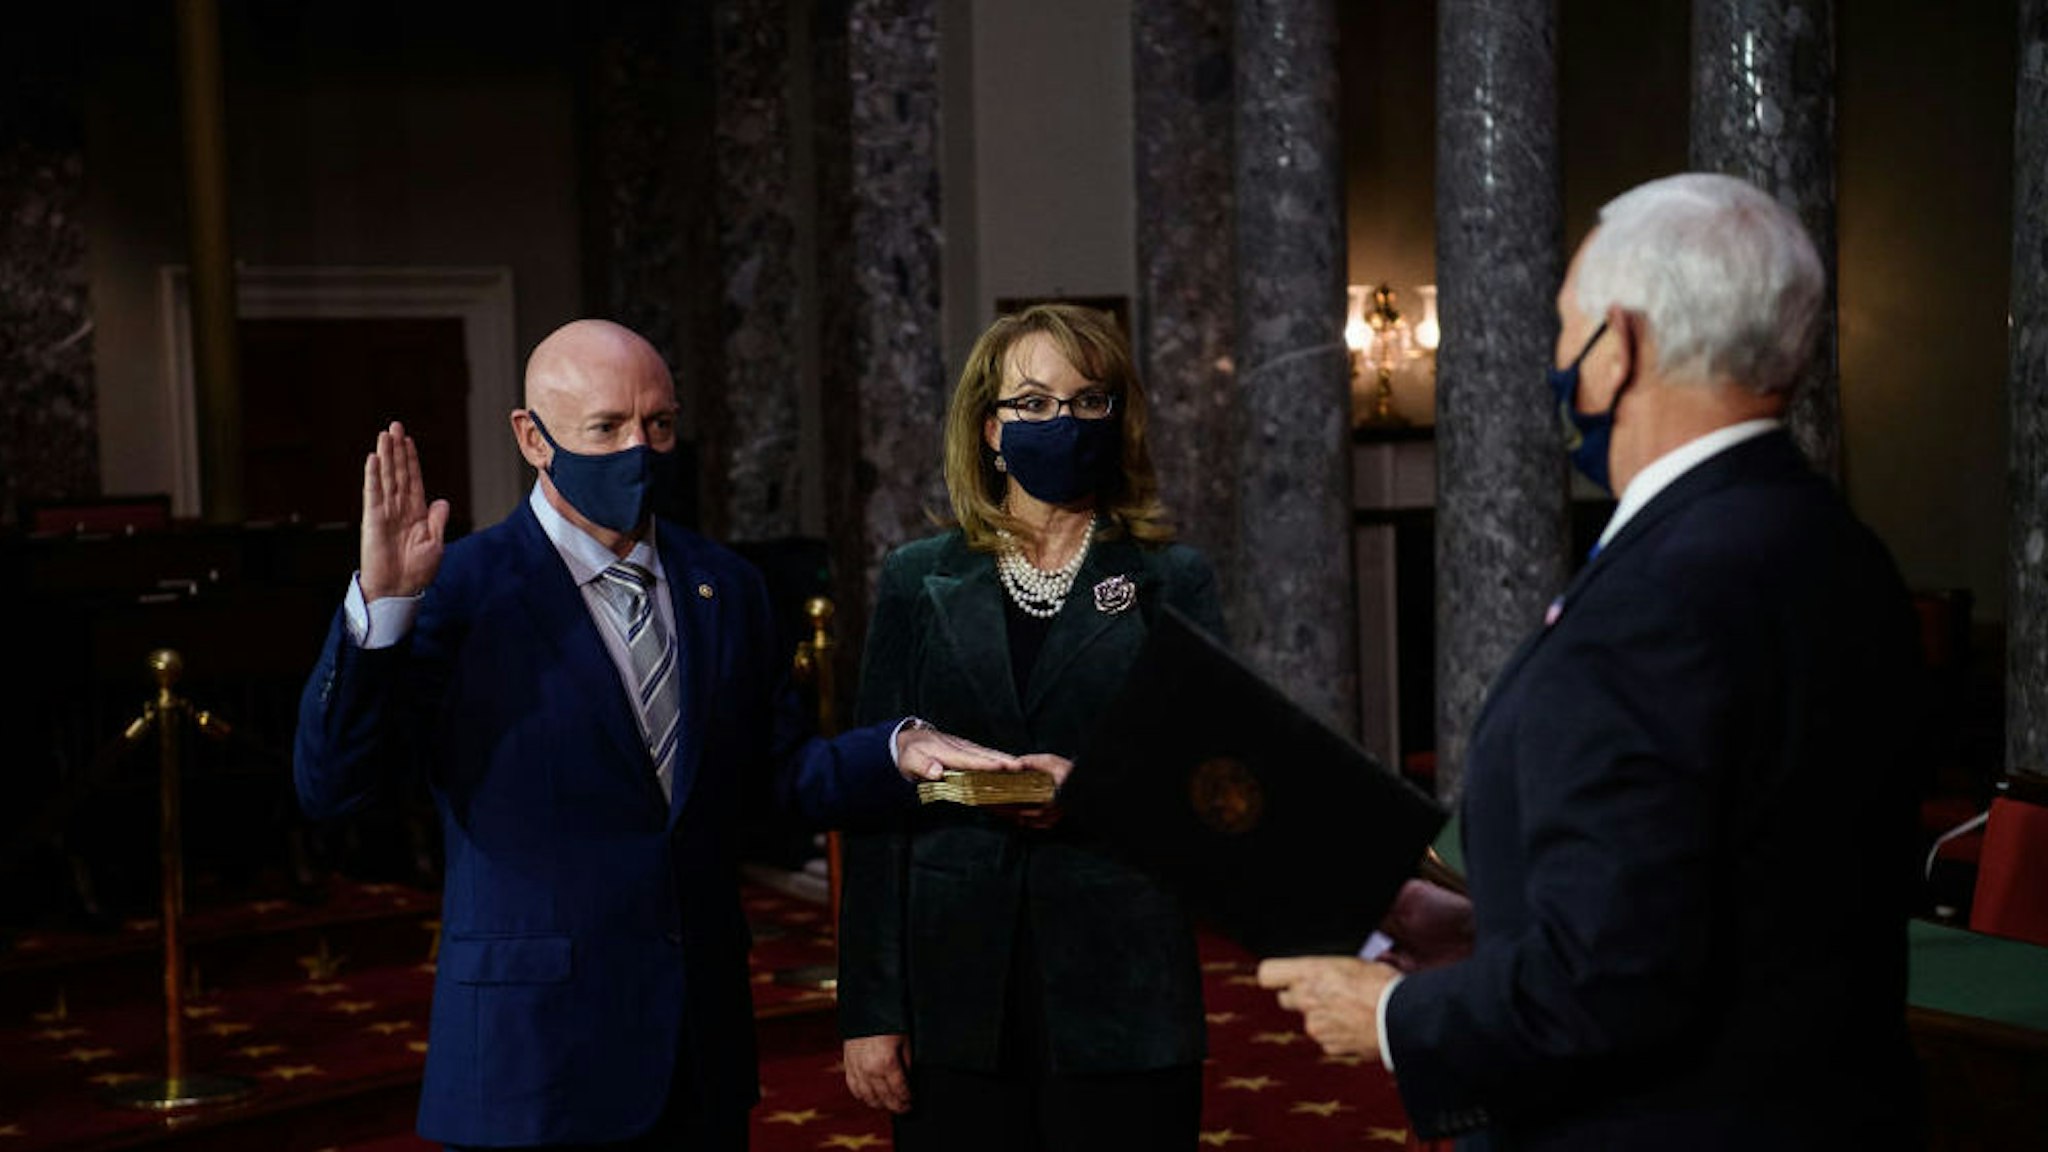 Senator Mark Kelly, a Democrat from Arizona, left, is ceremoniously sworn-in by U.S. Vice President Mike Pence, right, beside his wife, former congresswoman Gabrielle Giffords, on Capitol Hill in Washington, D.C., U.S., on Wednesday, Dec. 2, 2020. Kelly, a former astronaut, defeated Senator Martha McSally in a special election last month.